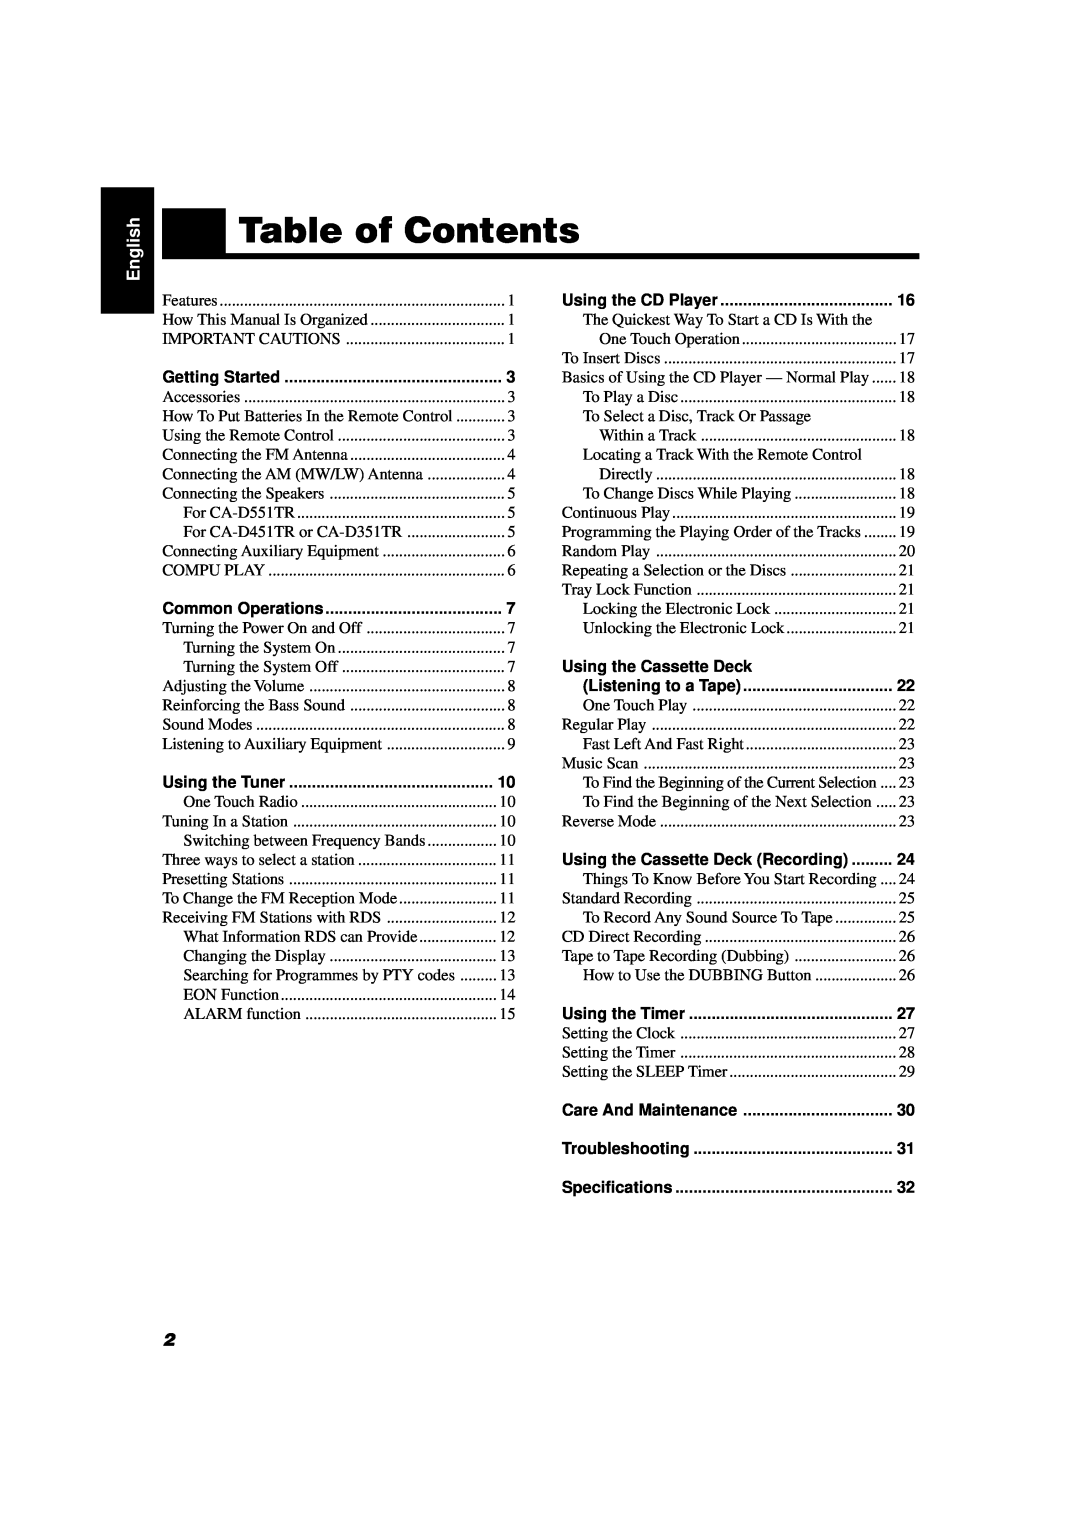 JVC CA-D551TR, CA-D351TR, CA-D451TR manual Table of Contents, Using the Cassette Deck, Using the Tuner, English 